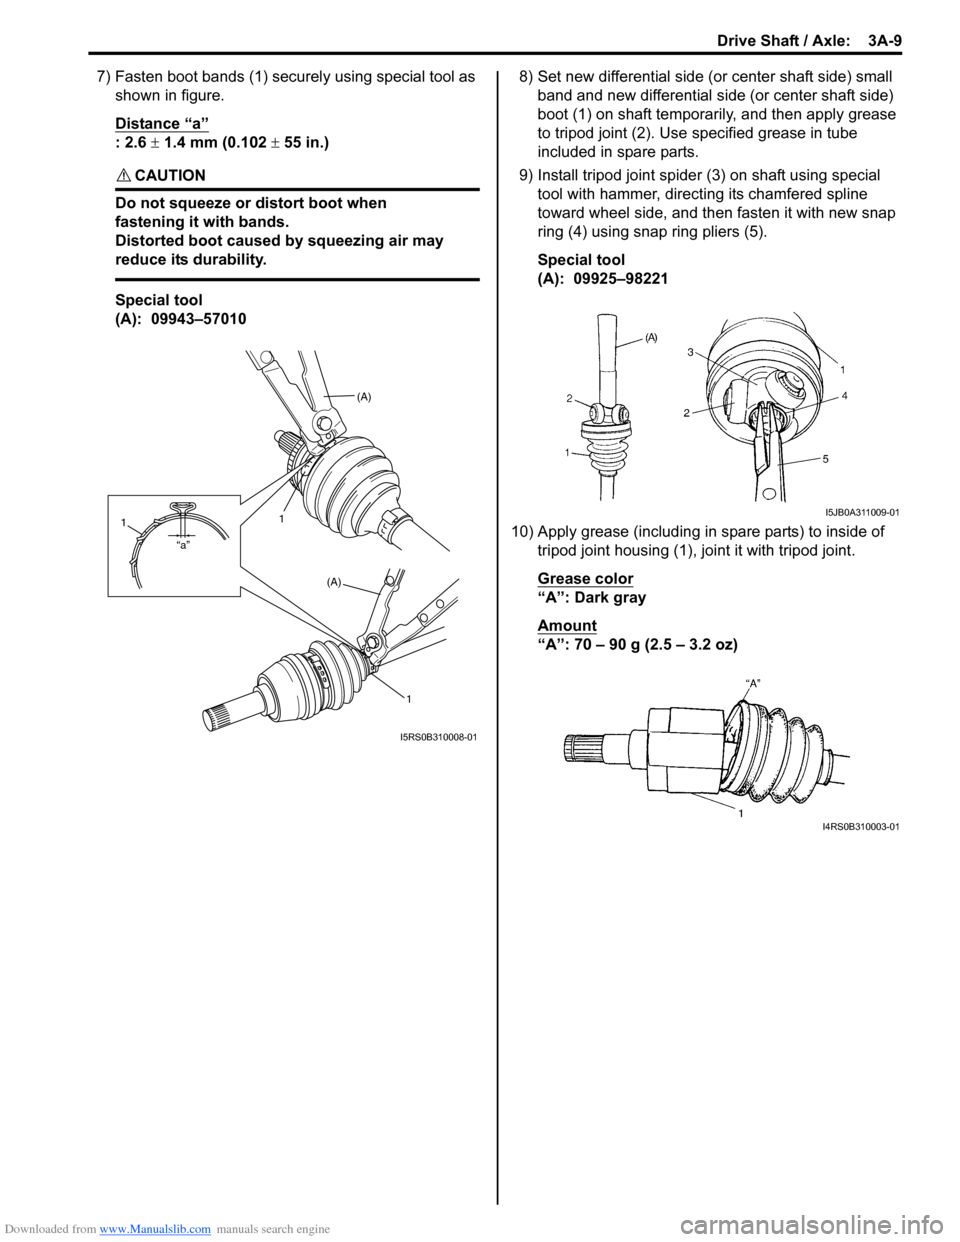 SUZUKI SWIFT 2008 2.G Service Workshop Manual Downloaded from www.Manualslib.com manuals search engine Drive Shaft / Axle:  3A-9
7) Fasten boot bands (1) securely using special tool as 
shown in figure.
Distance “a”
: 2.6 ±  1.4 mm (0.102 ±